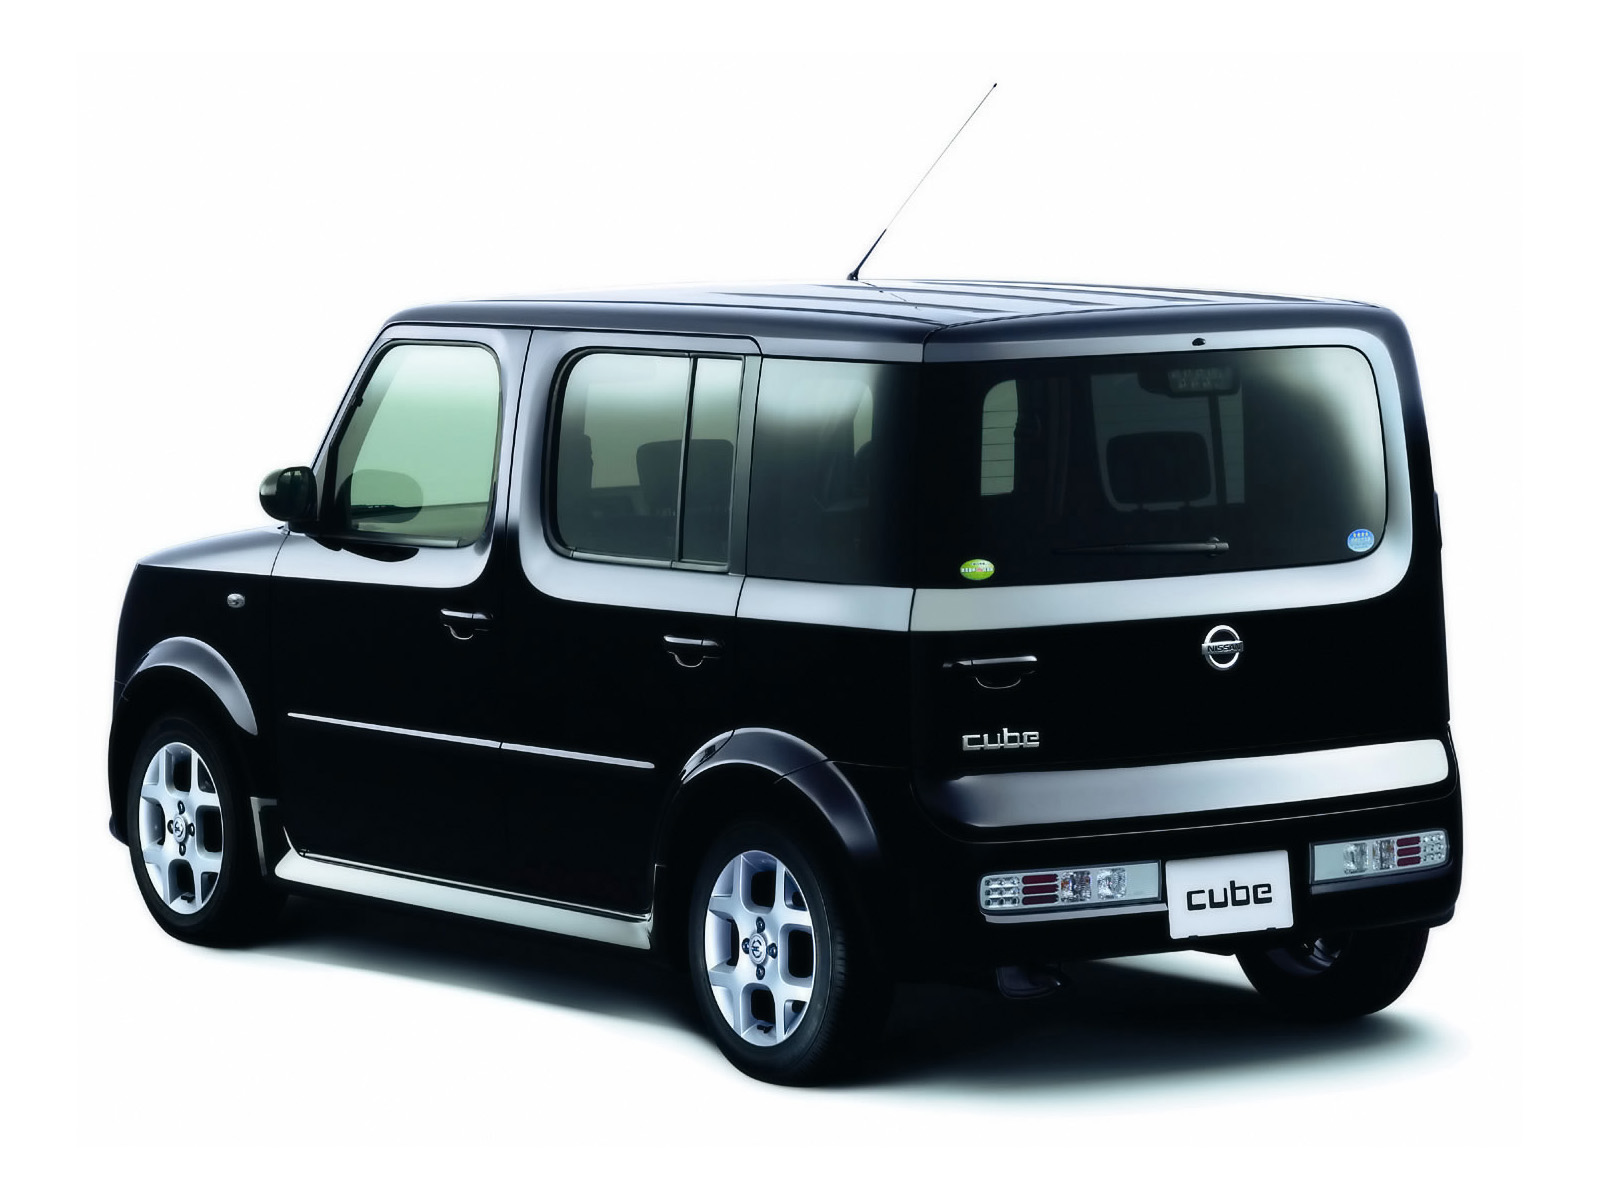 You can vote for this Nissan Cube photo